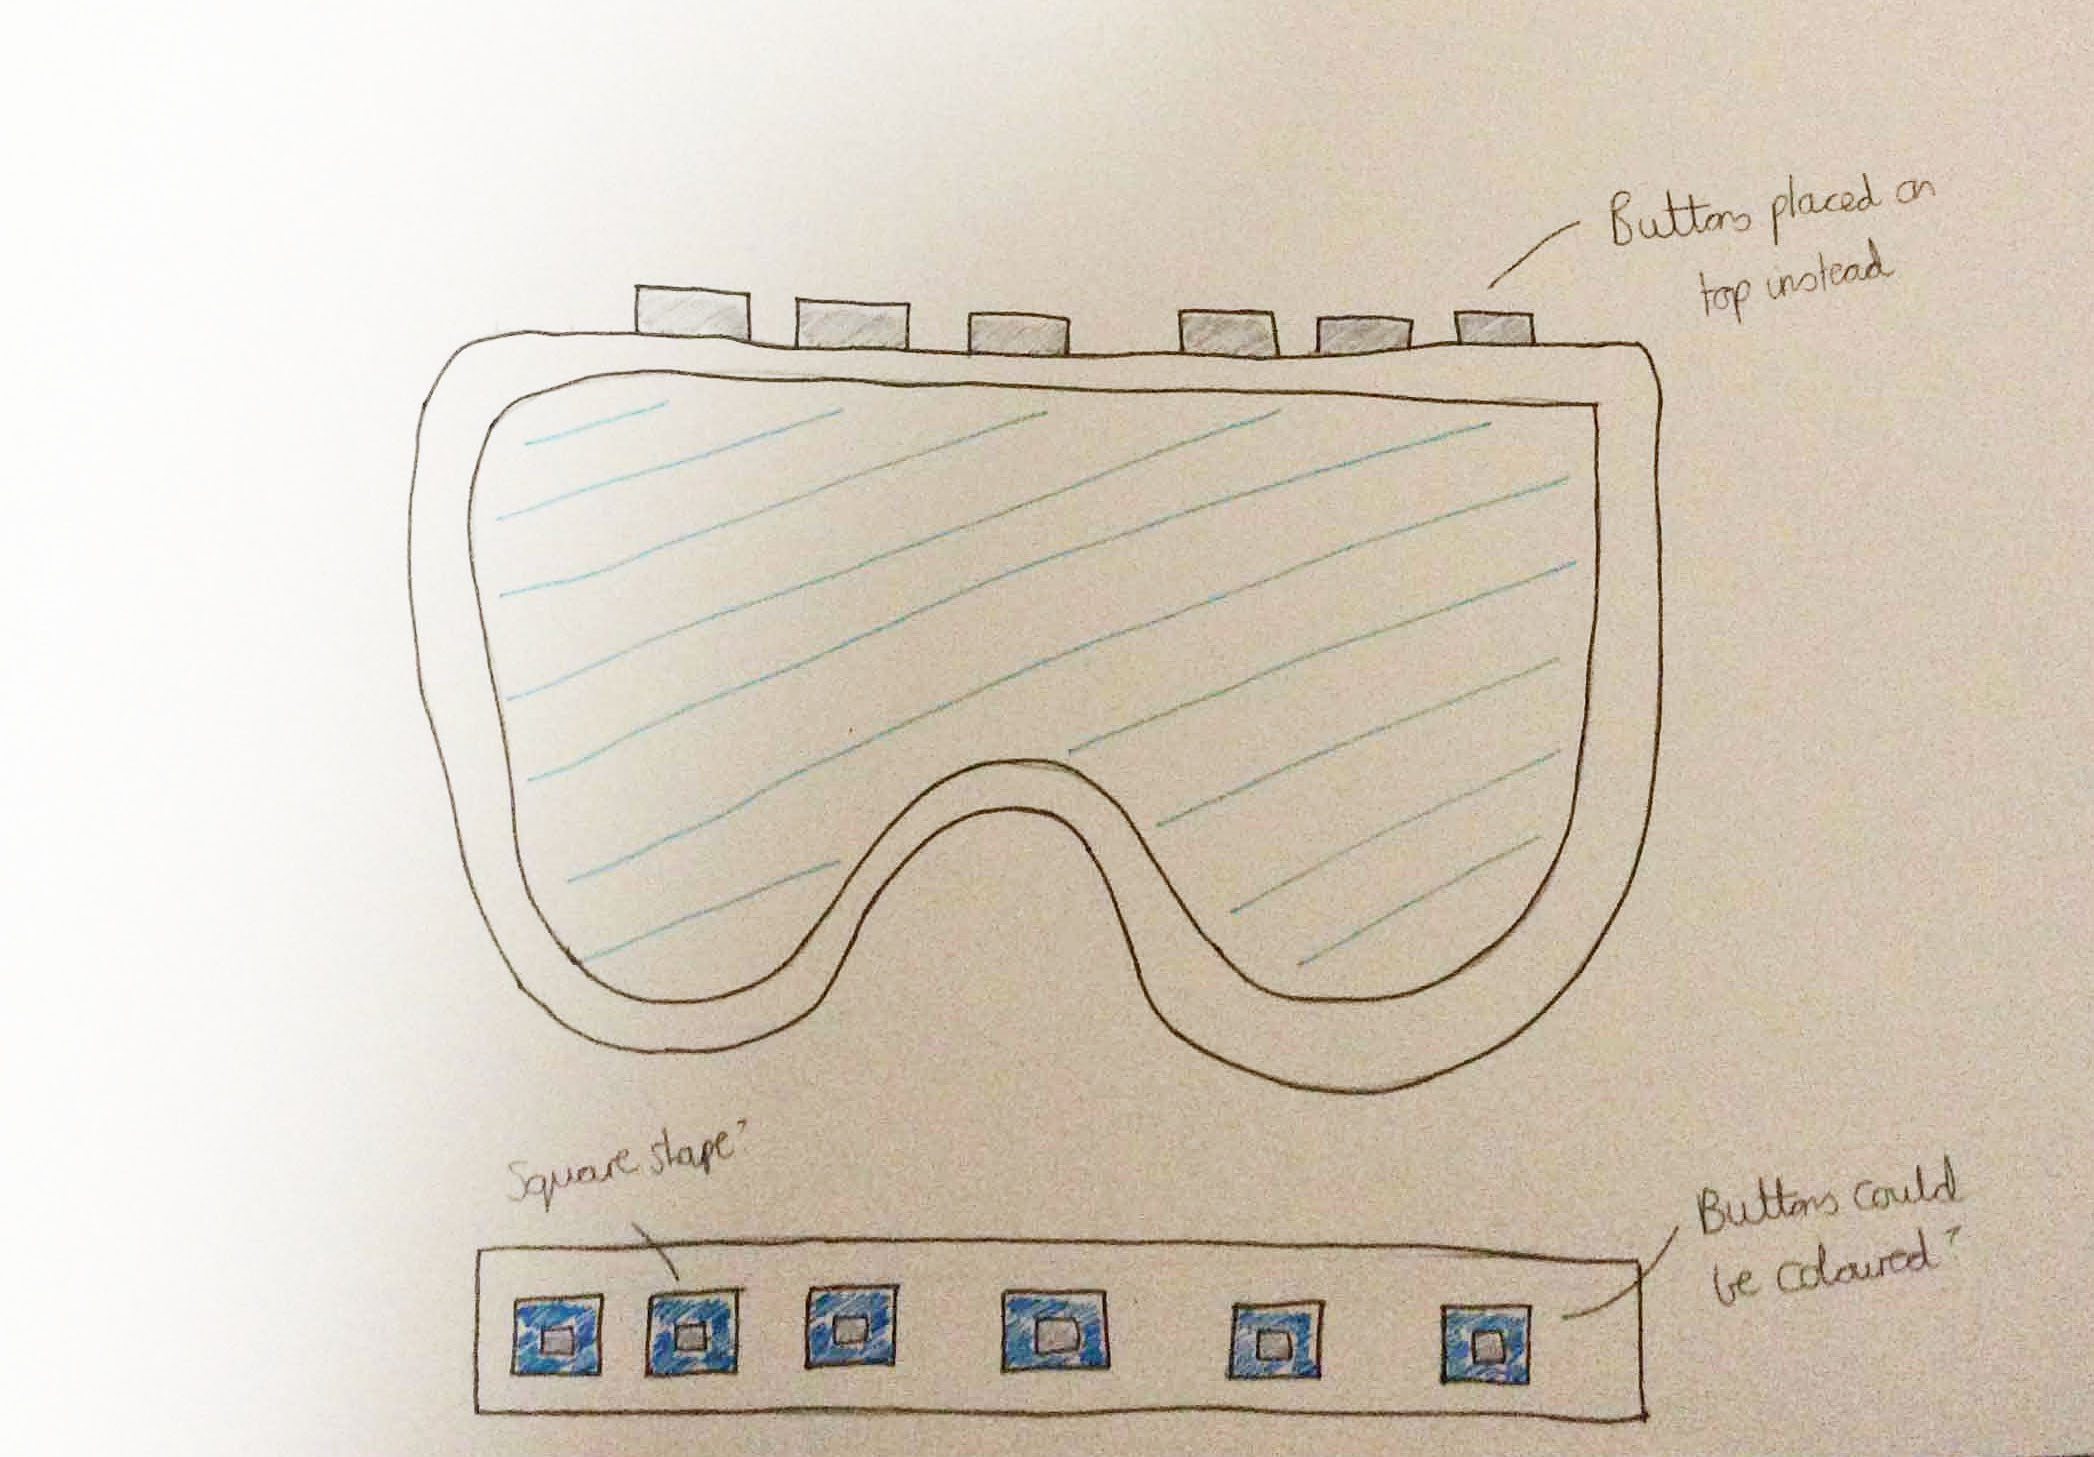 The Idea Relating to the Buttons being Situated on the Top of the Goggles